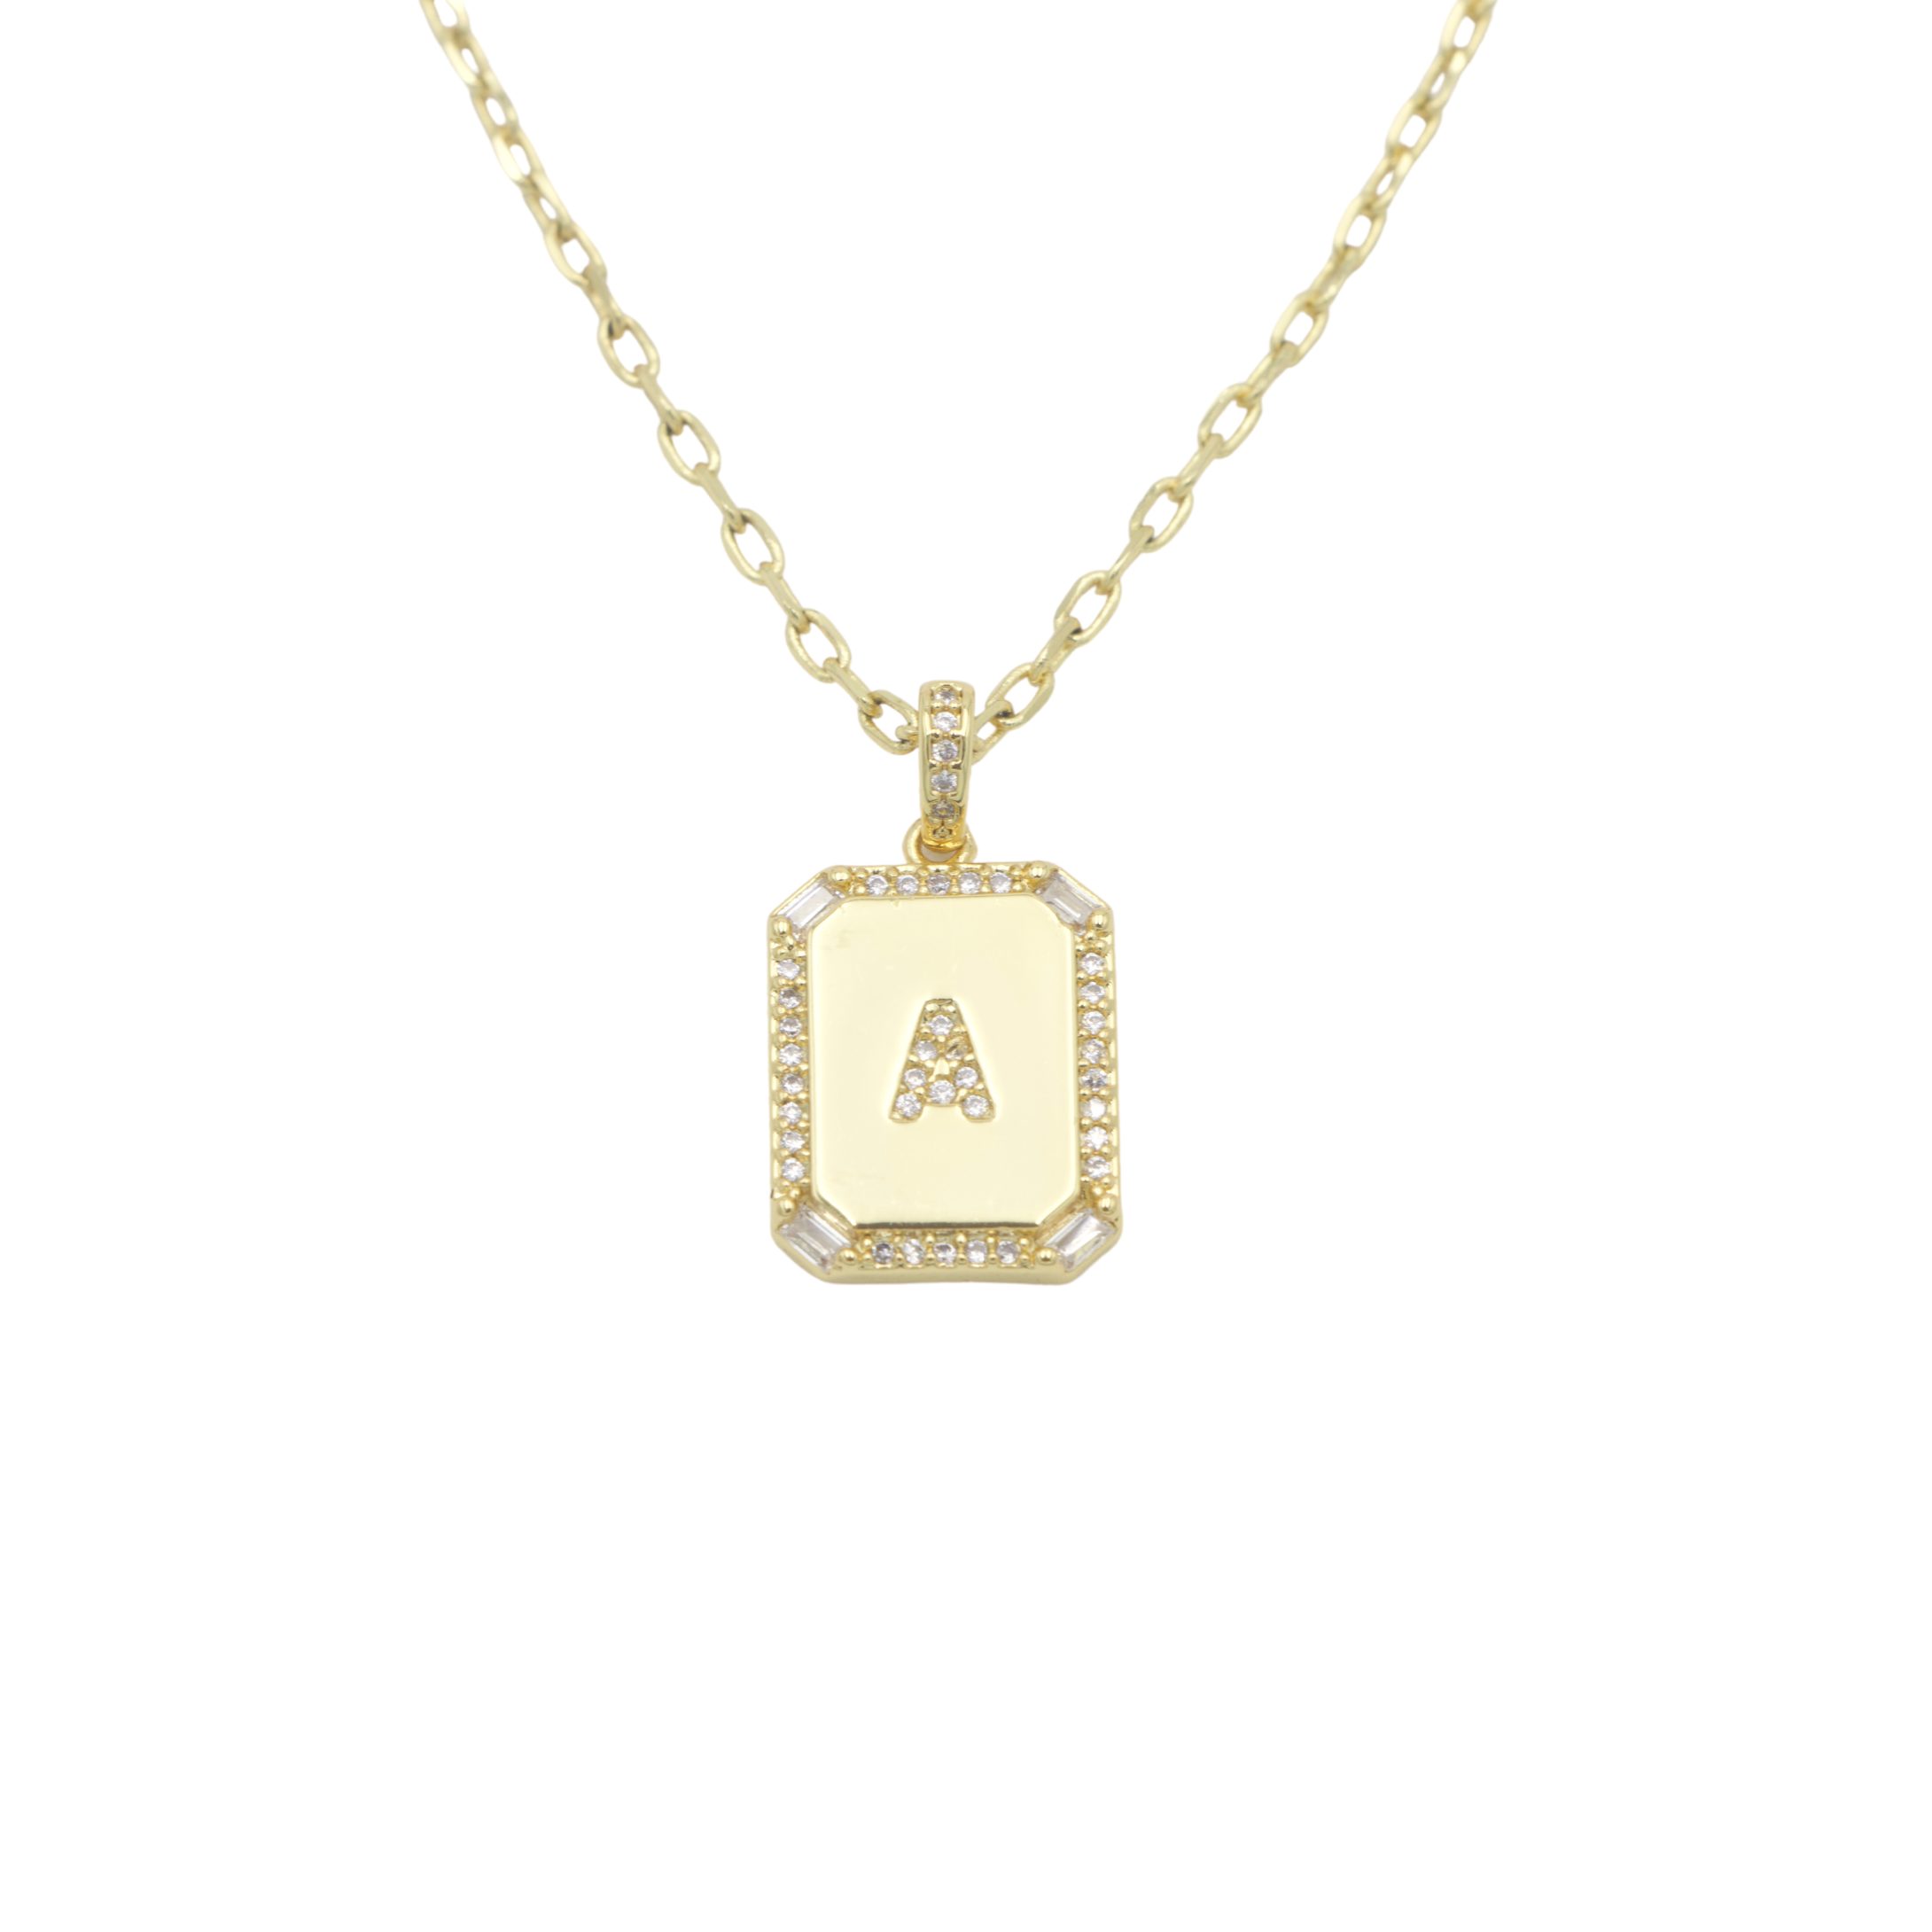 AW Boutique's gold filled 16 inch cable chain necklace finished with a dainty initial pendant with cubic zirconia detail. A initial shown.